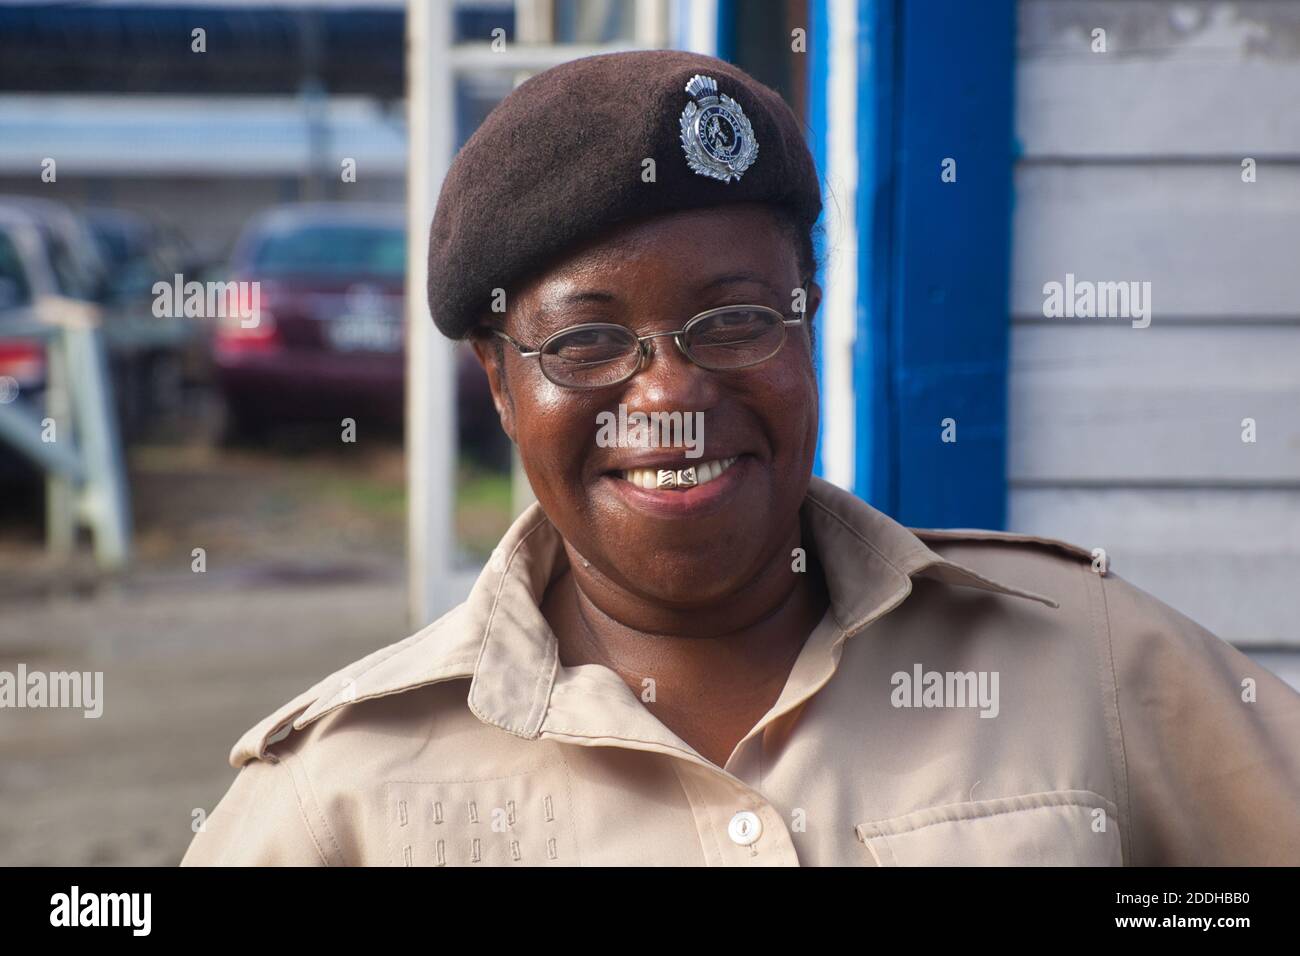 A local woman security guard with a beaming smile and two gold front teeth, poses at the port entrance to Georgetown, Guyana, South America Stock Photo